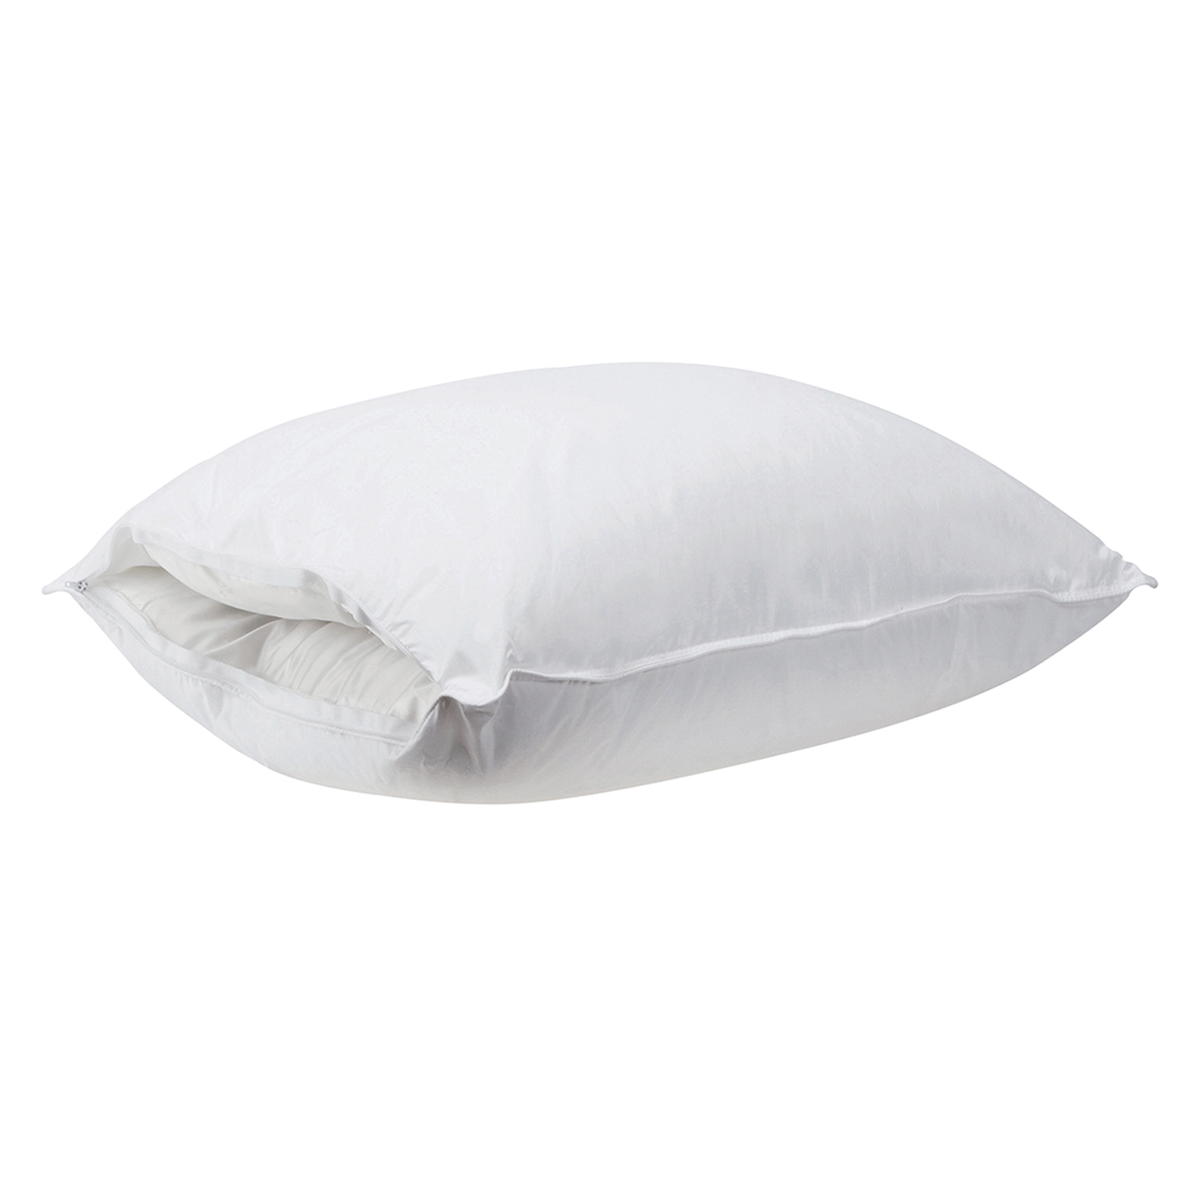 Clear Image of Downtown Company Pillow by Design White